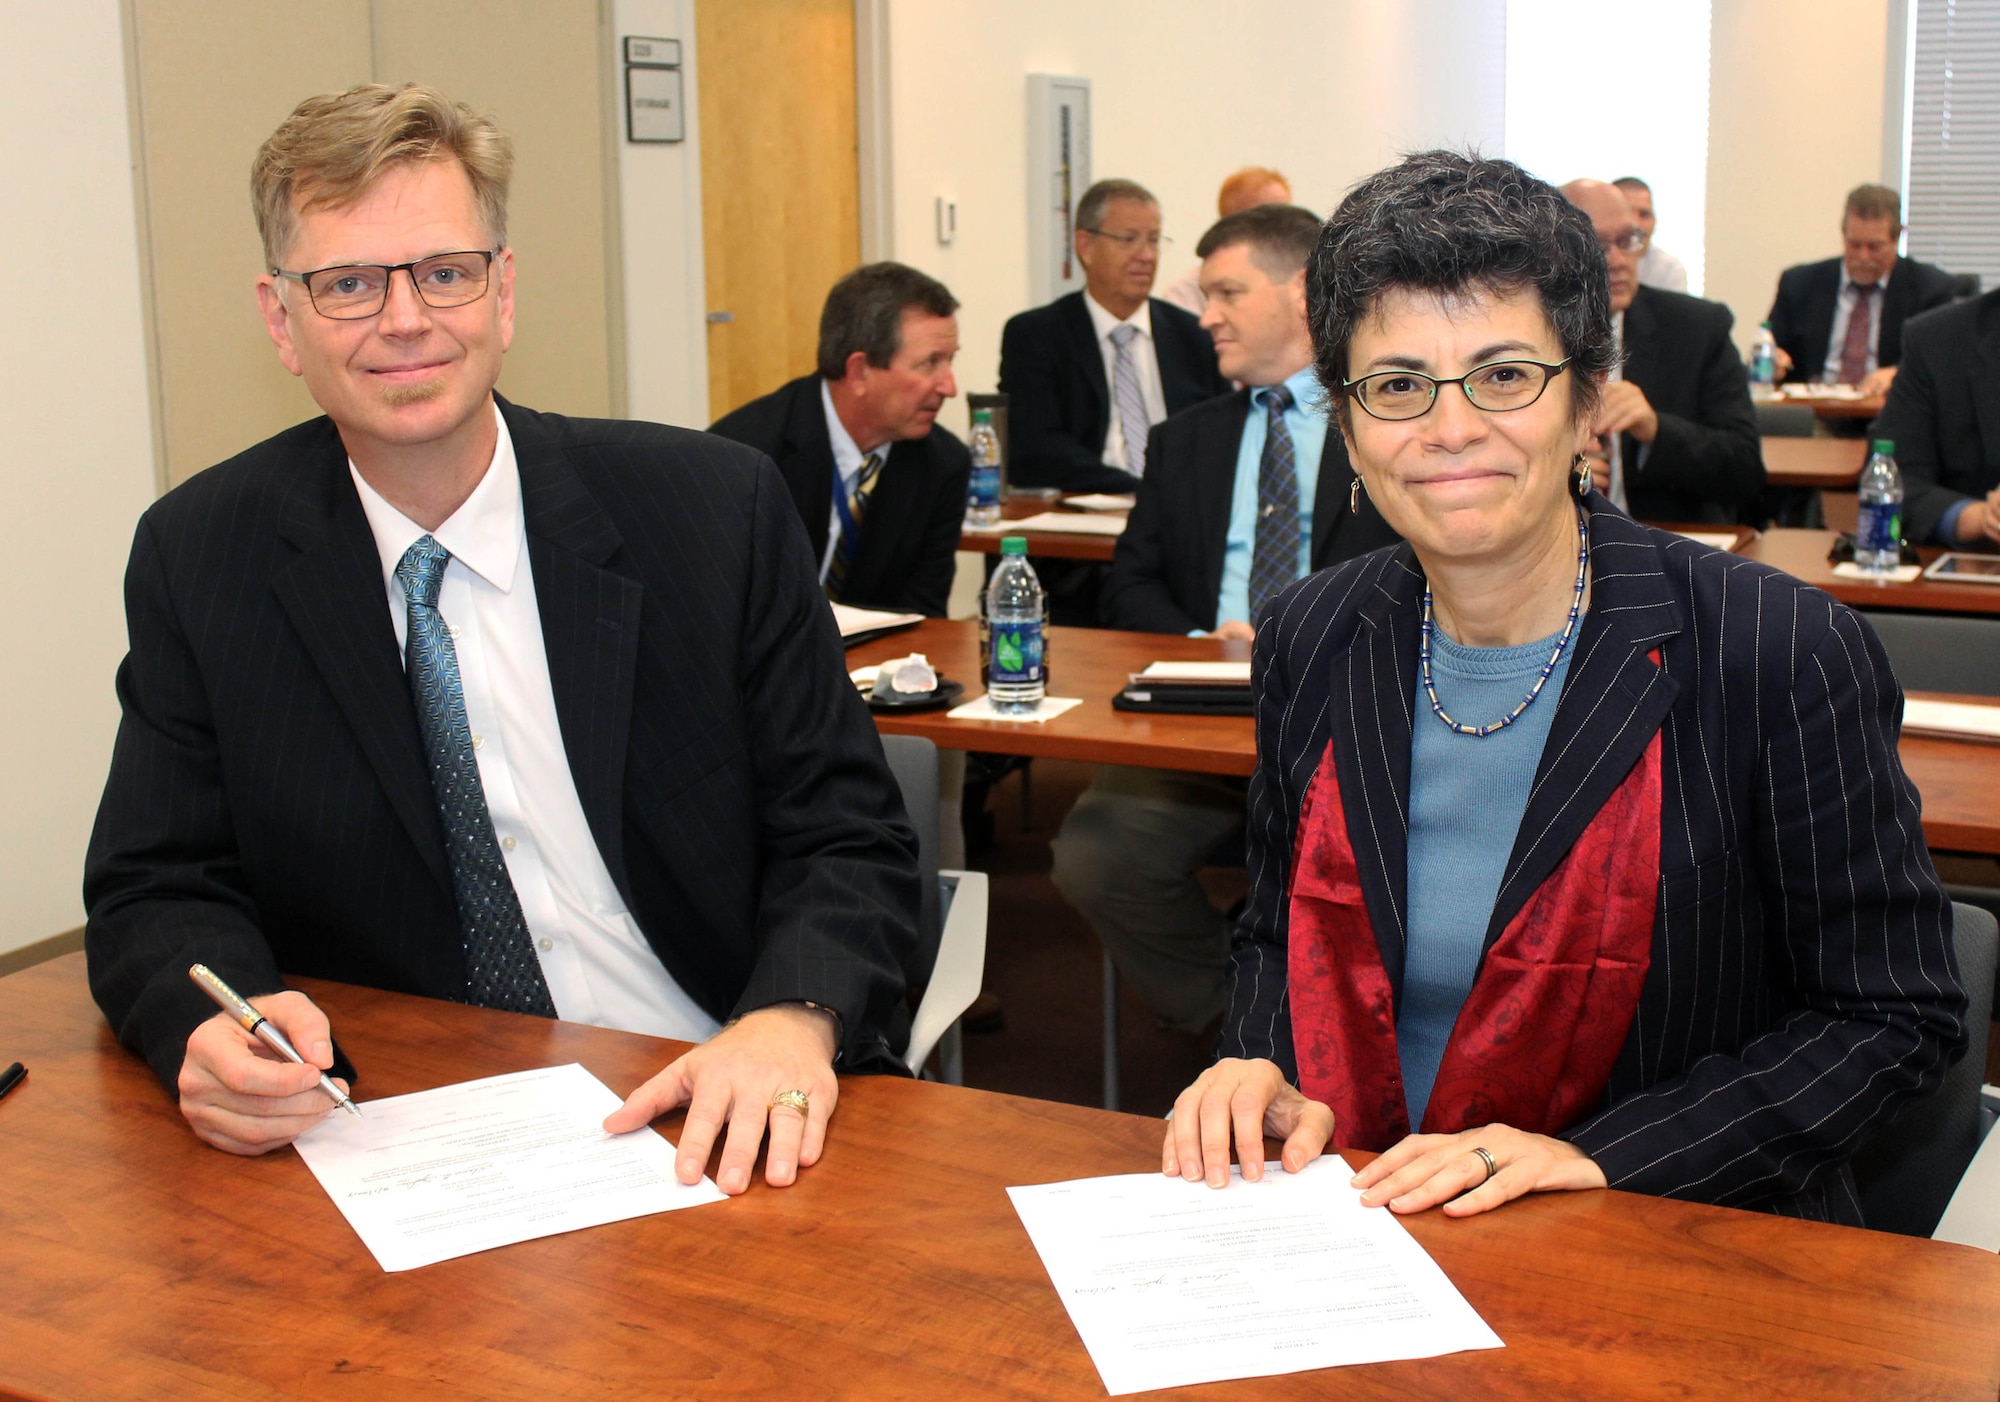 Dr. Glenn E. Sjoden (left) and Dr. Gisele Bennett (right) prepare to renew the Cooperative Research and Development Agreement between the Air Force Technical Applications Center and the Florida Institute of Technology March 1, 2019 on the FIT campus in Melbourne, Florida.  Sjoden, AFTAC's chief scientist, and Bennett, FIT's senior vice president for research, signed the CRADA to allow for scientific collaboration between the two organizations.  (Florida Institute of Technology photo by Adam Lowenstein)